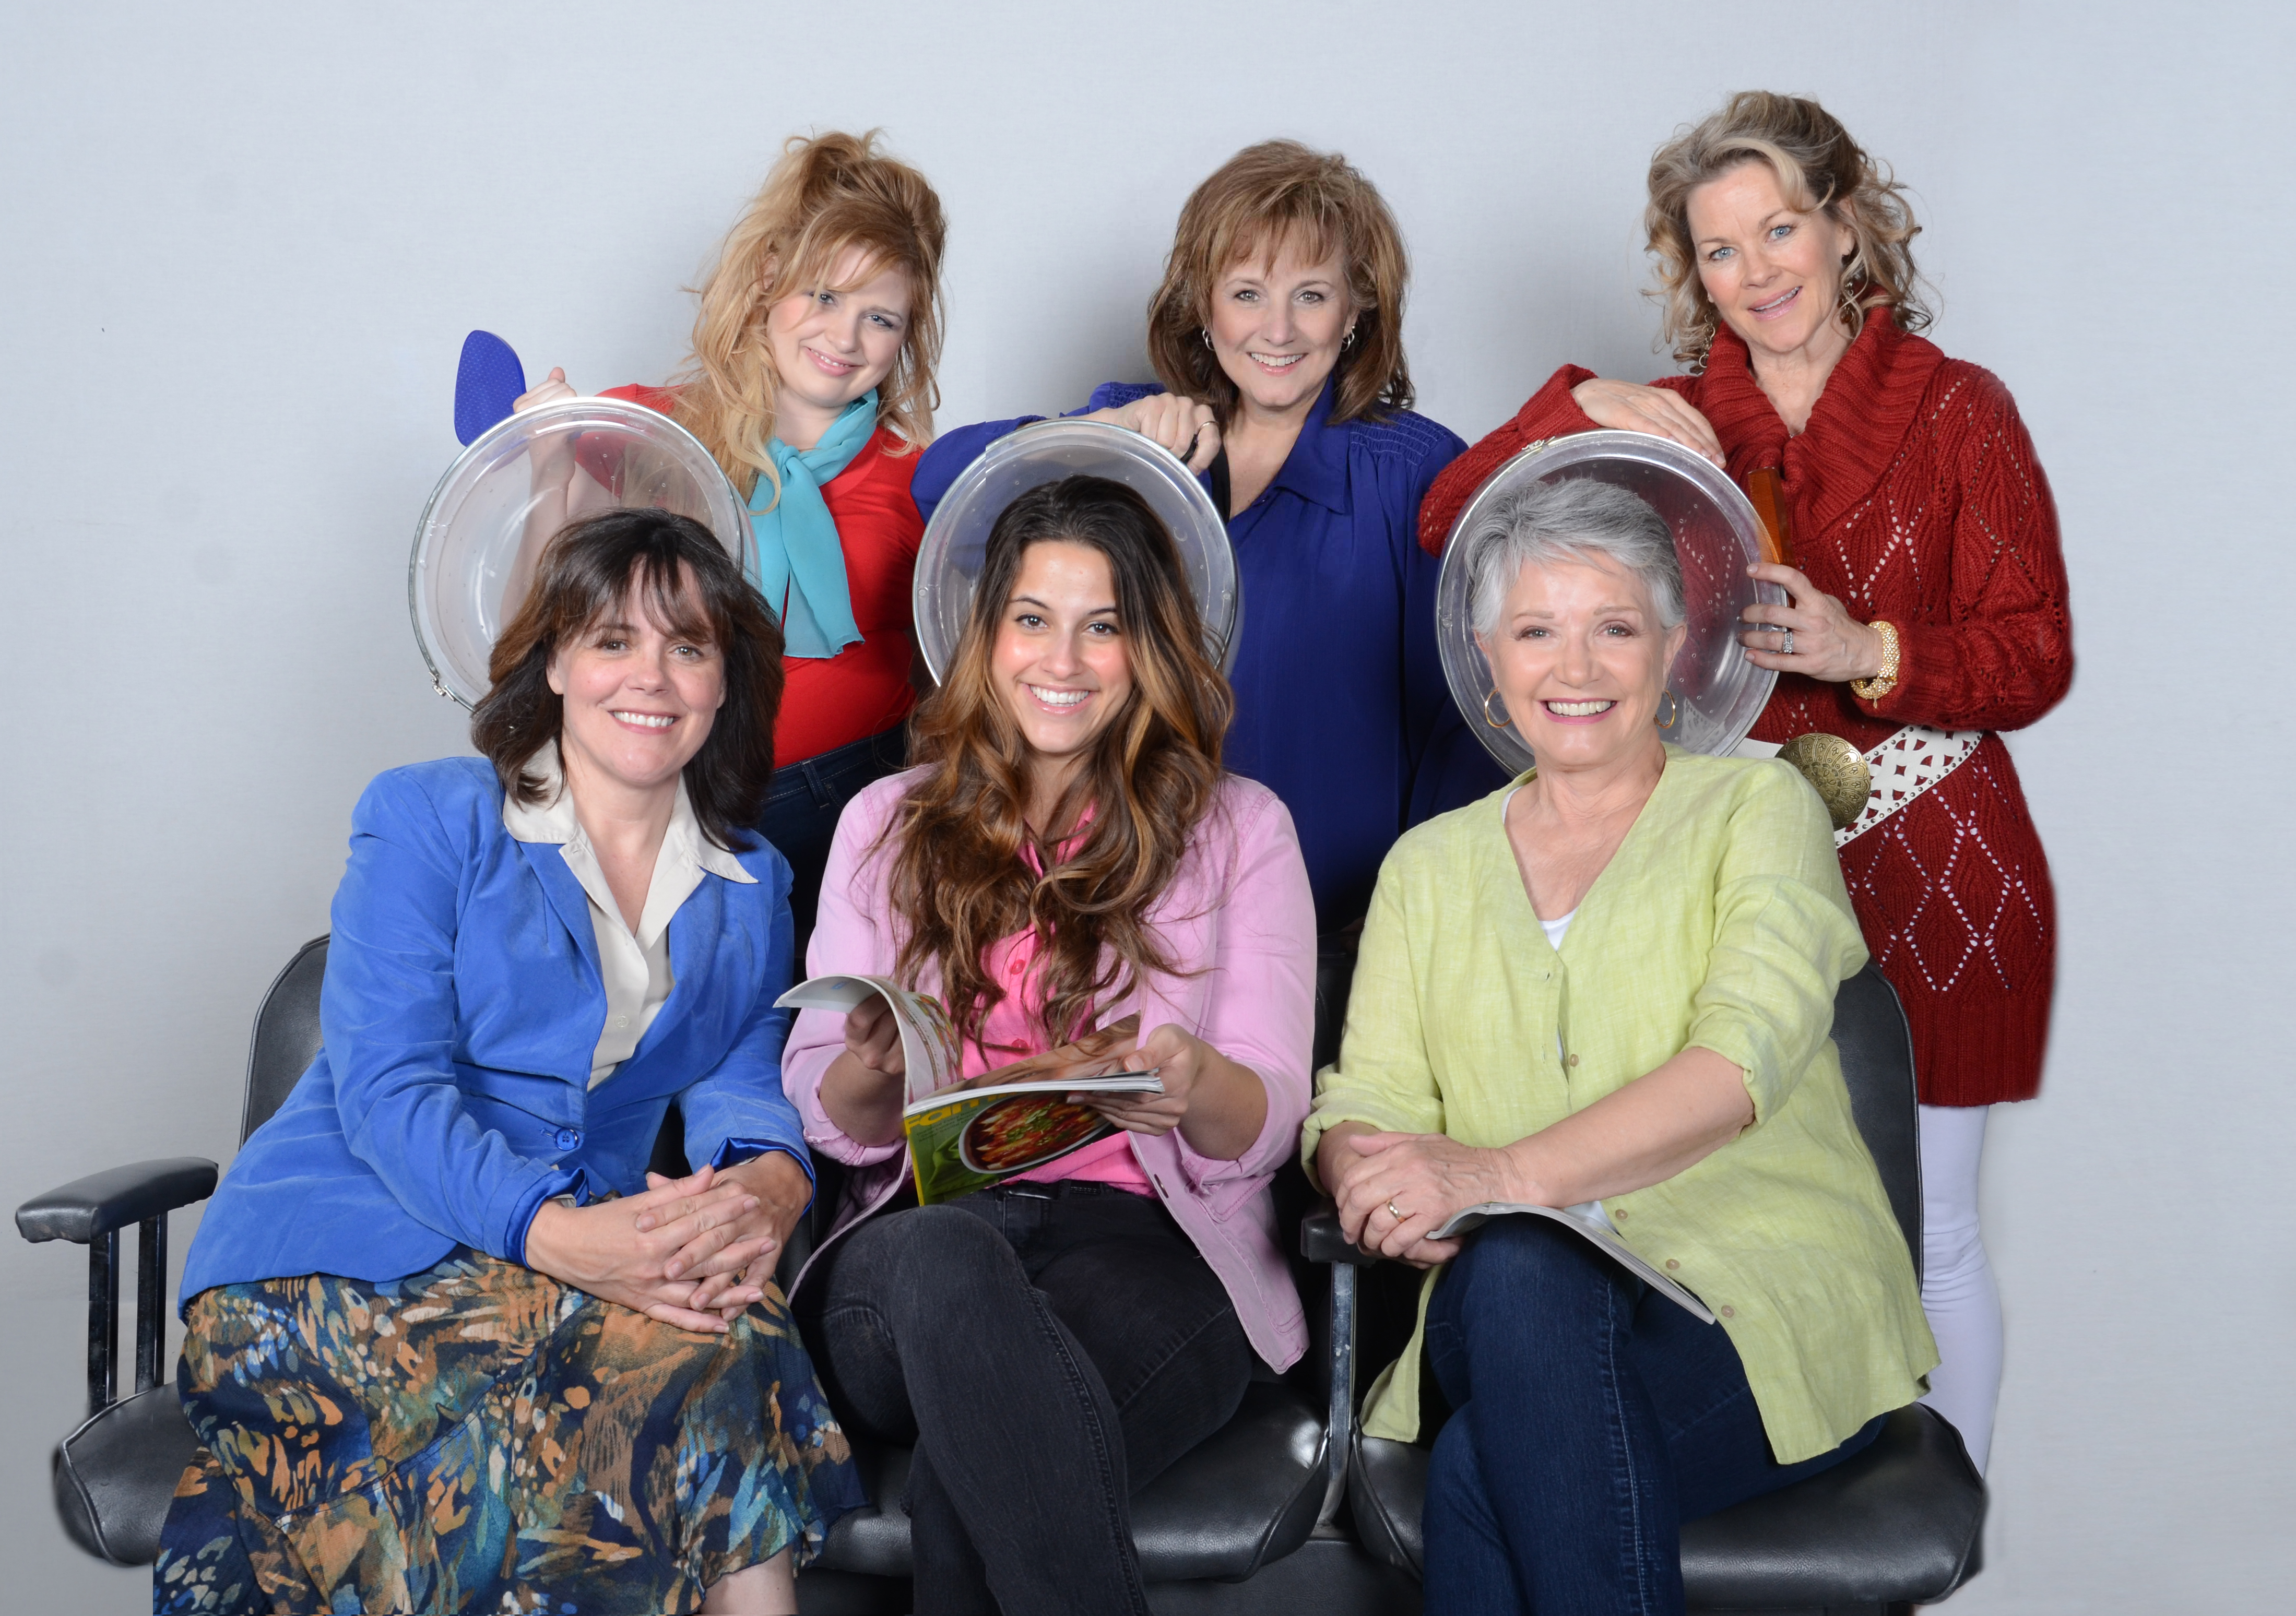 Scottsdale Community Players, "Steel Magnolias," 2013. L to R – Top Row Ashley Faulkner as Annelle, Laura Durant as Clairee, Jodie Weiss as Truvy; L to R – Bottom Row Maureen Dias Watson as M’Lynn, Jamie Sandomire as Shelby, Patti Davis Suarez as Ouiser. (Photo by Laura Durant)